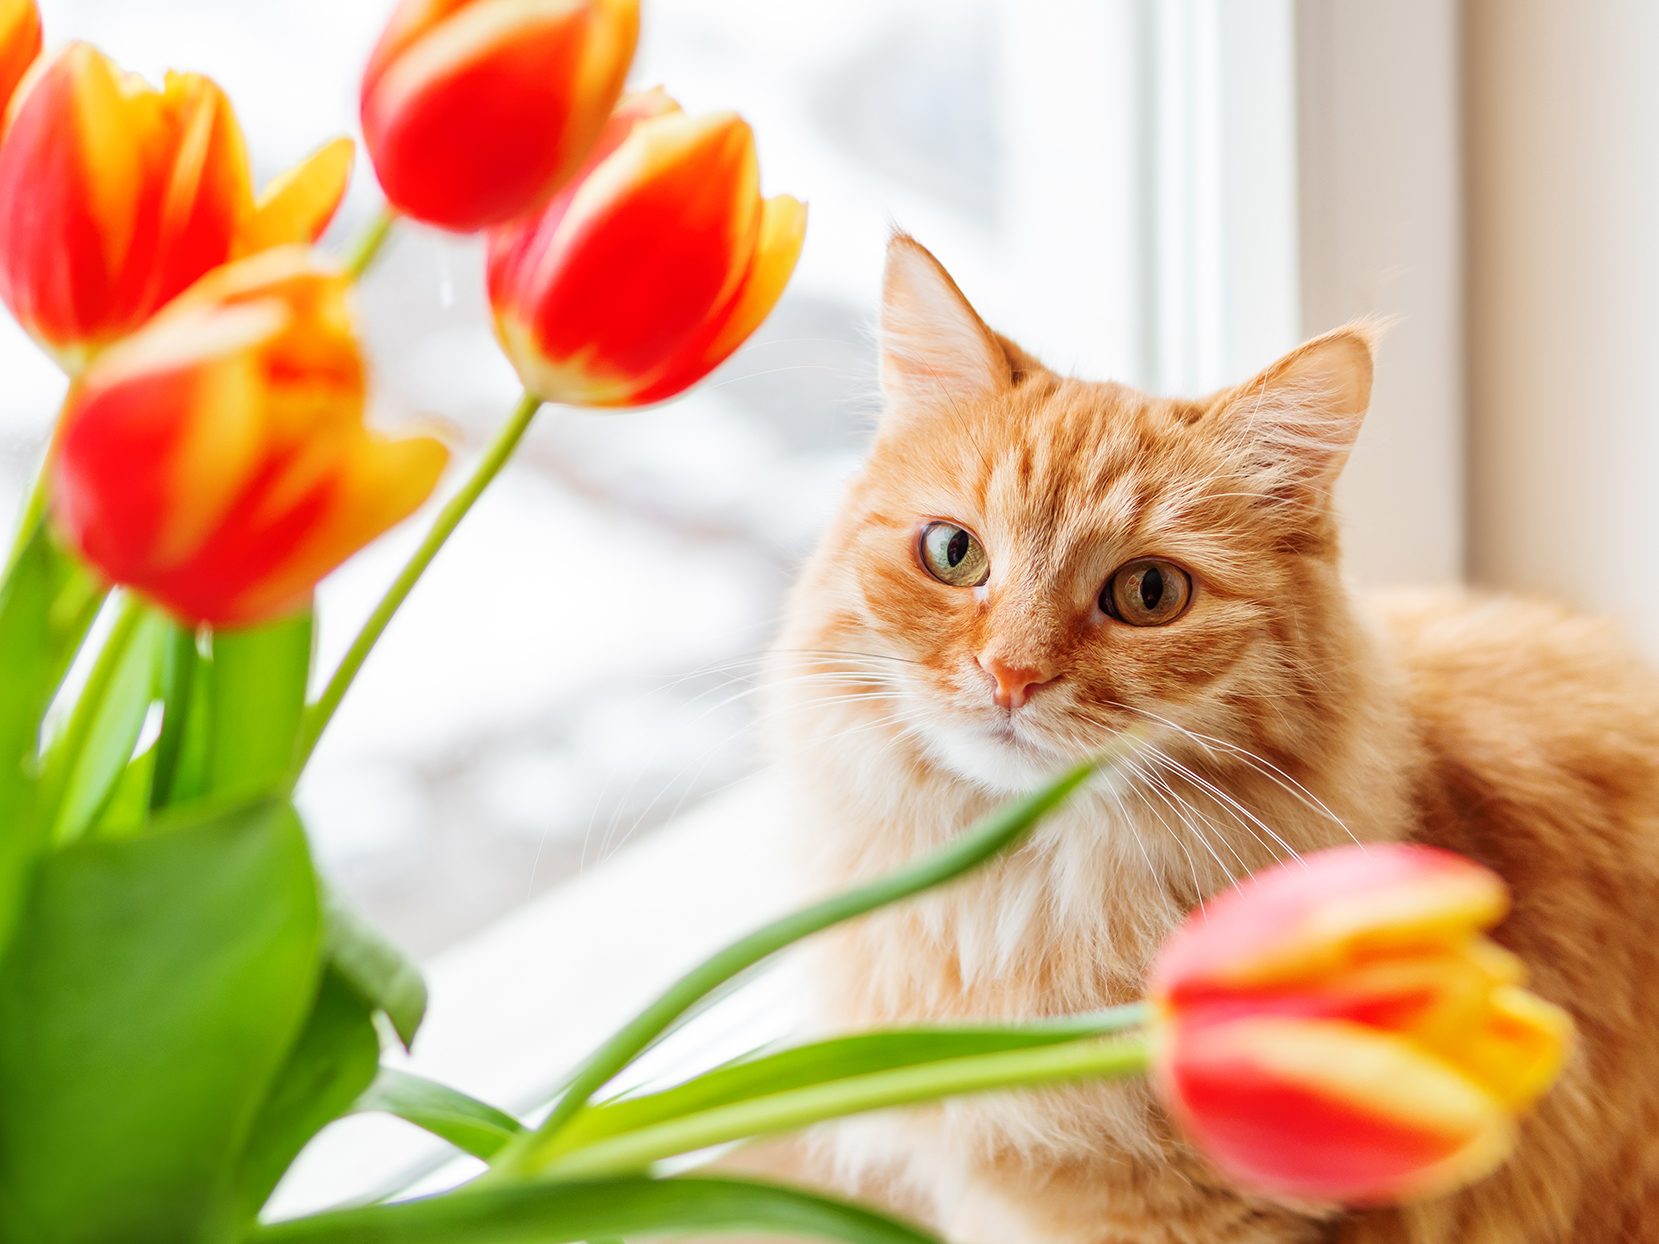 Distinctive Flower Names to Call Your Cat. Better Homes & Gardens